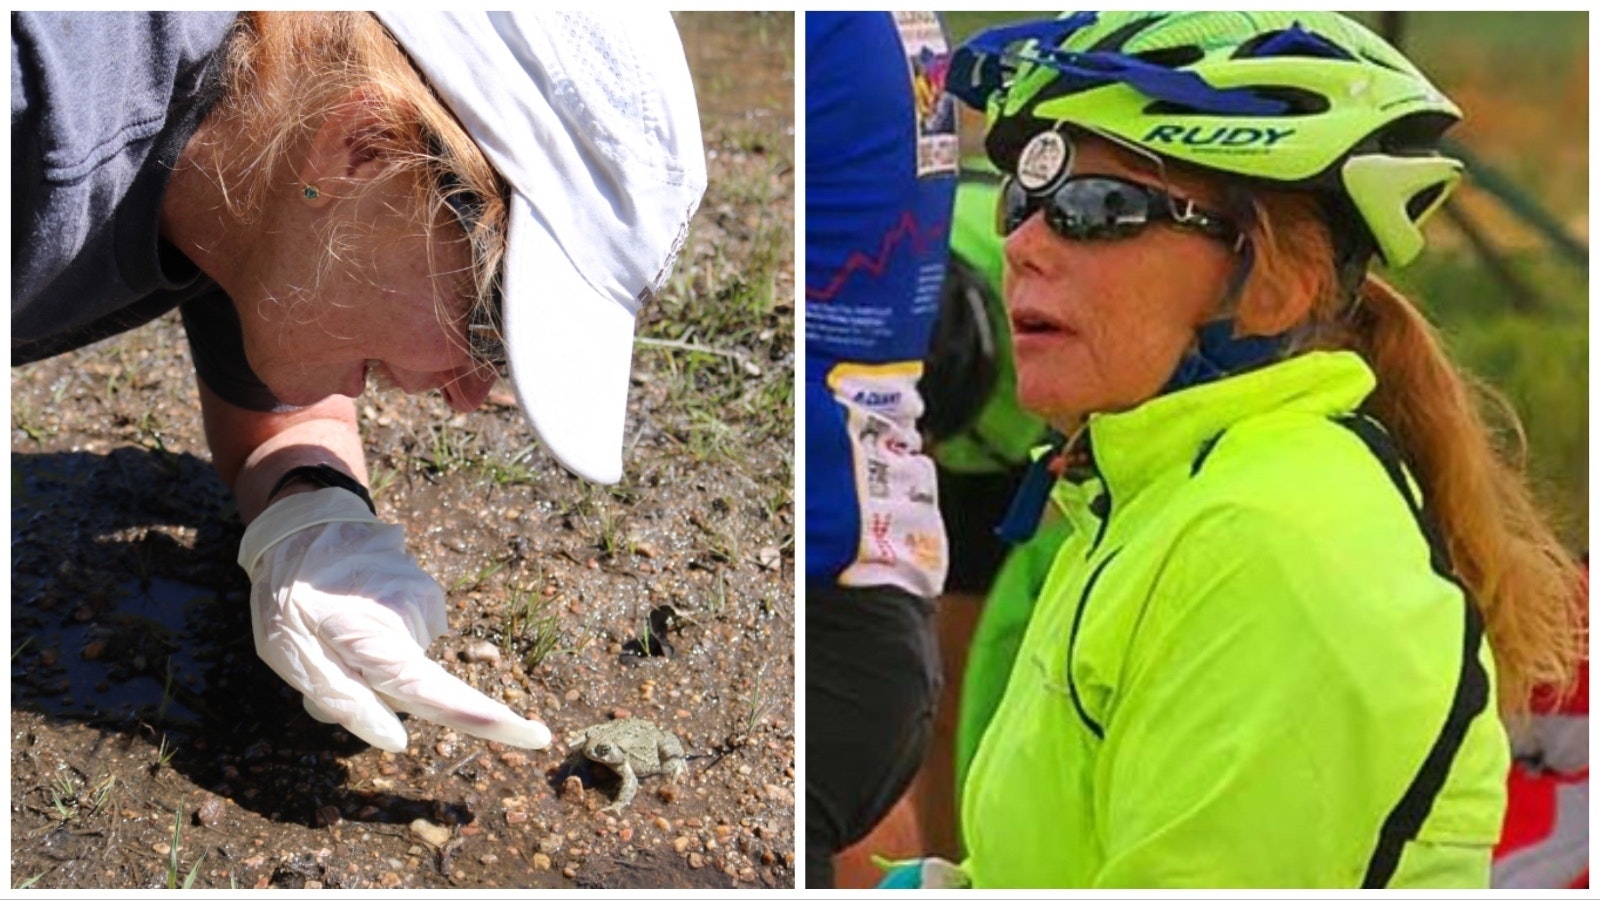 At left, wildlife biologist Amber Travsky checks on a Wyoming toad during a recent release of the rare toads back into the wild. At right, she takes a break at a rest stop during the Tour de Wyoming this past summer. She helped found the Tour de Wyoming decades ago.